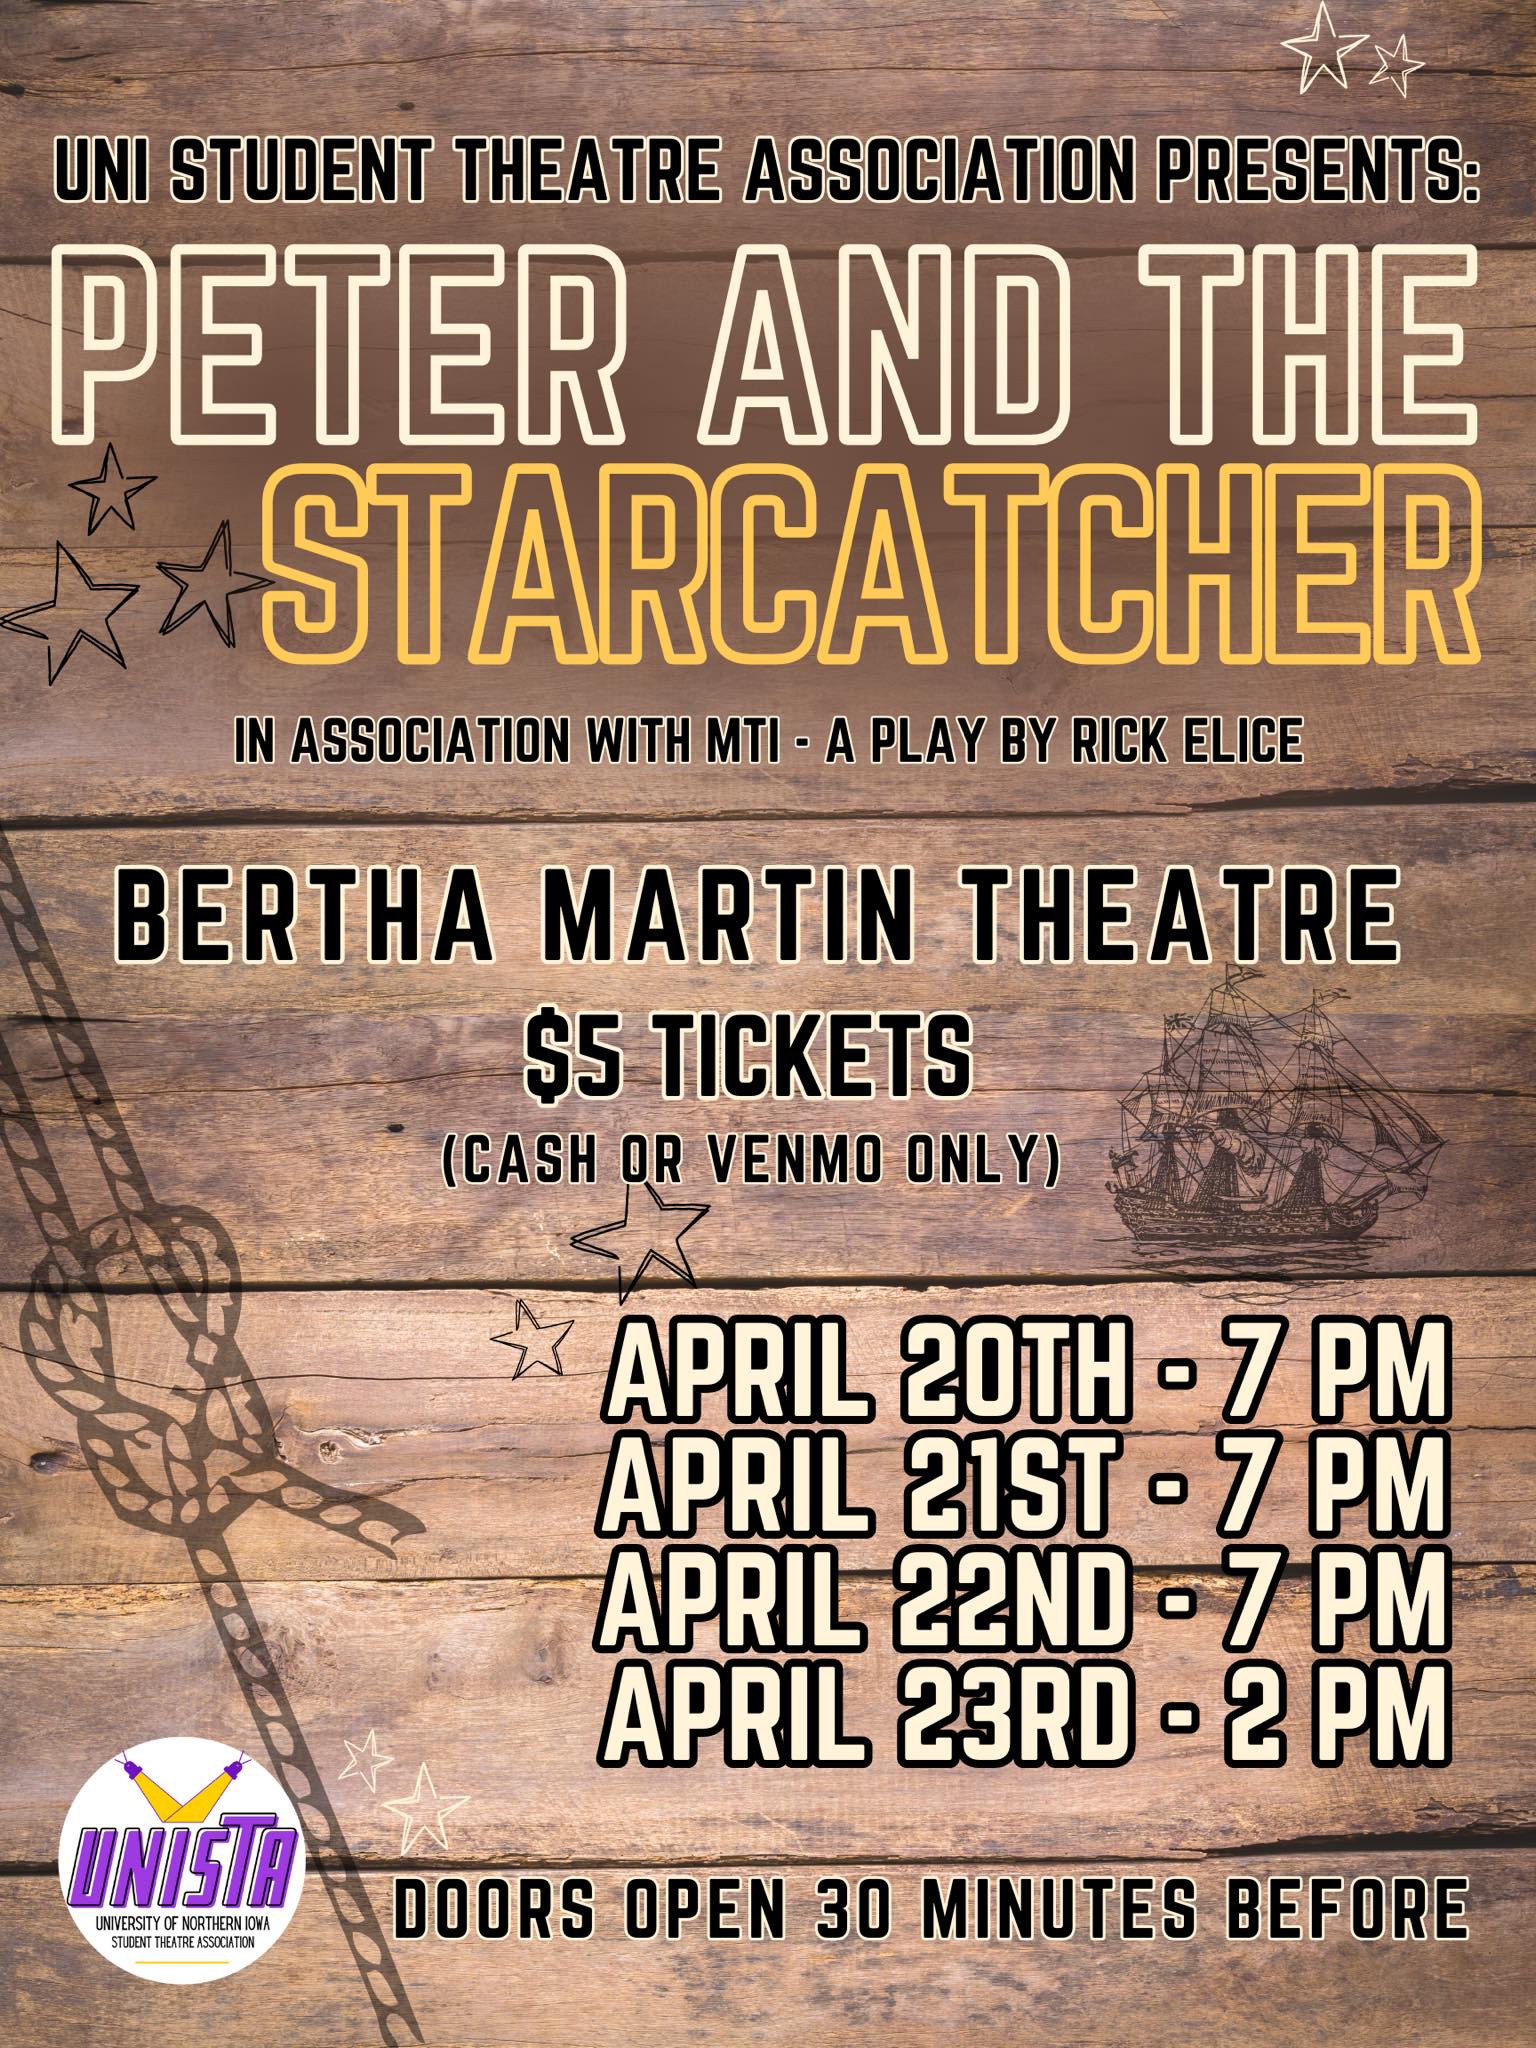 Poster Advertising UNISTA's production of Peter and the Starcatcher